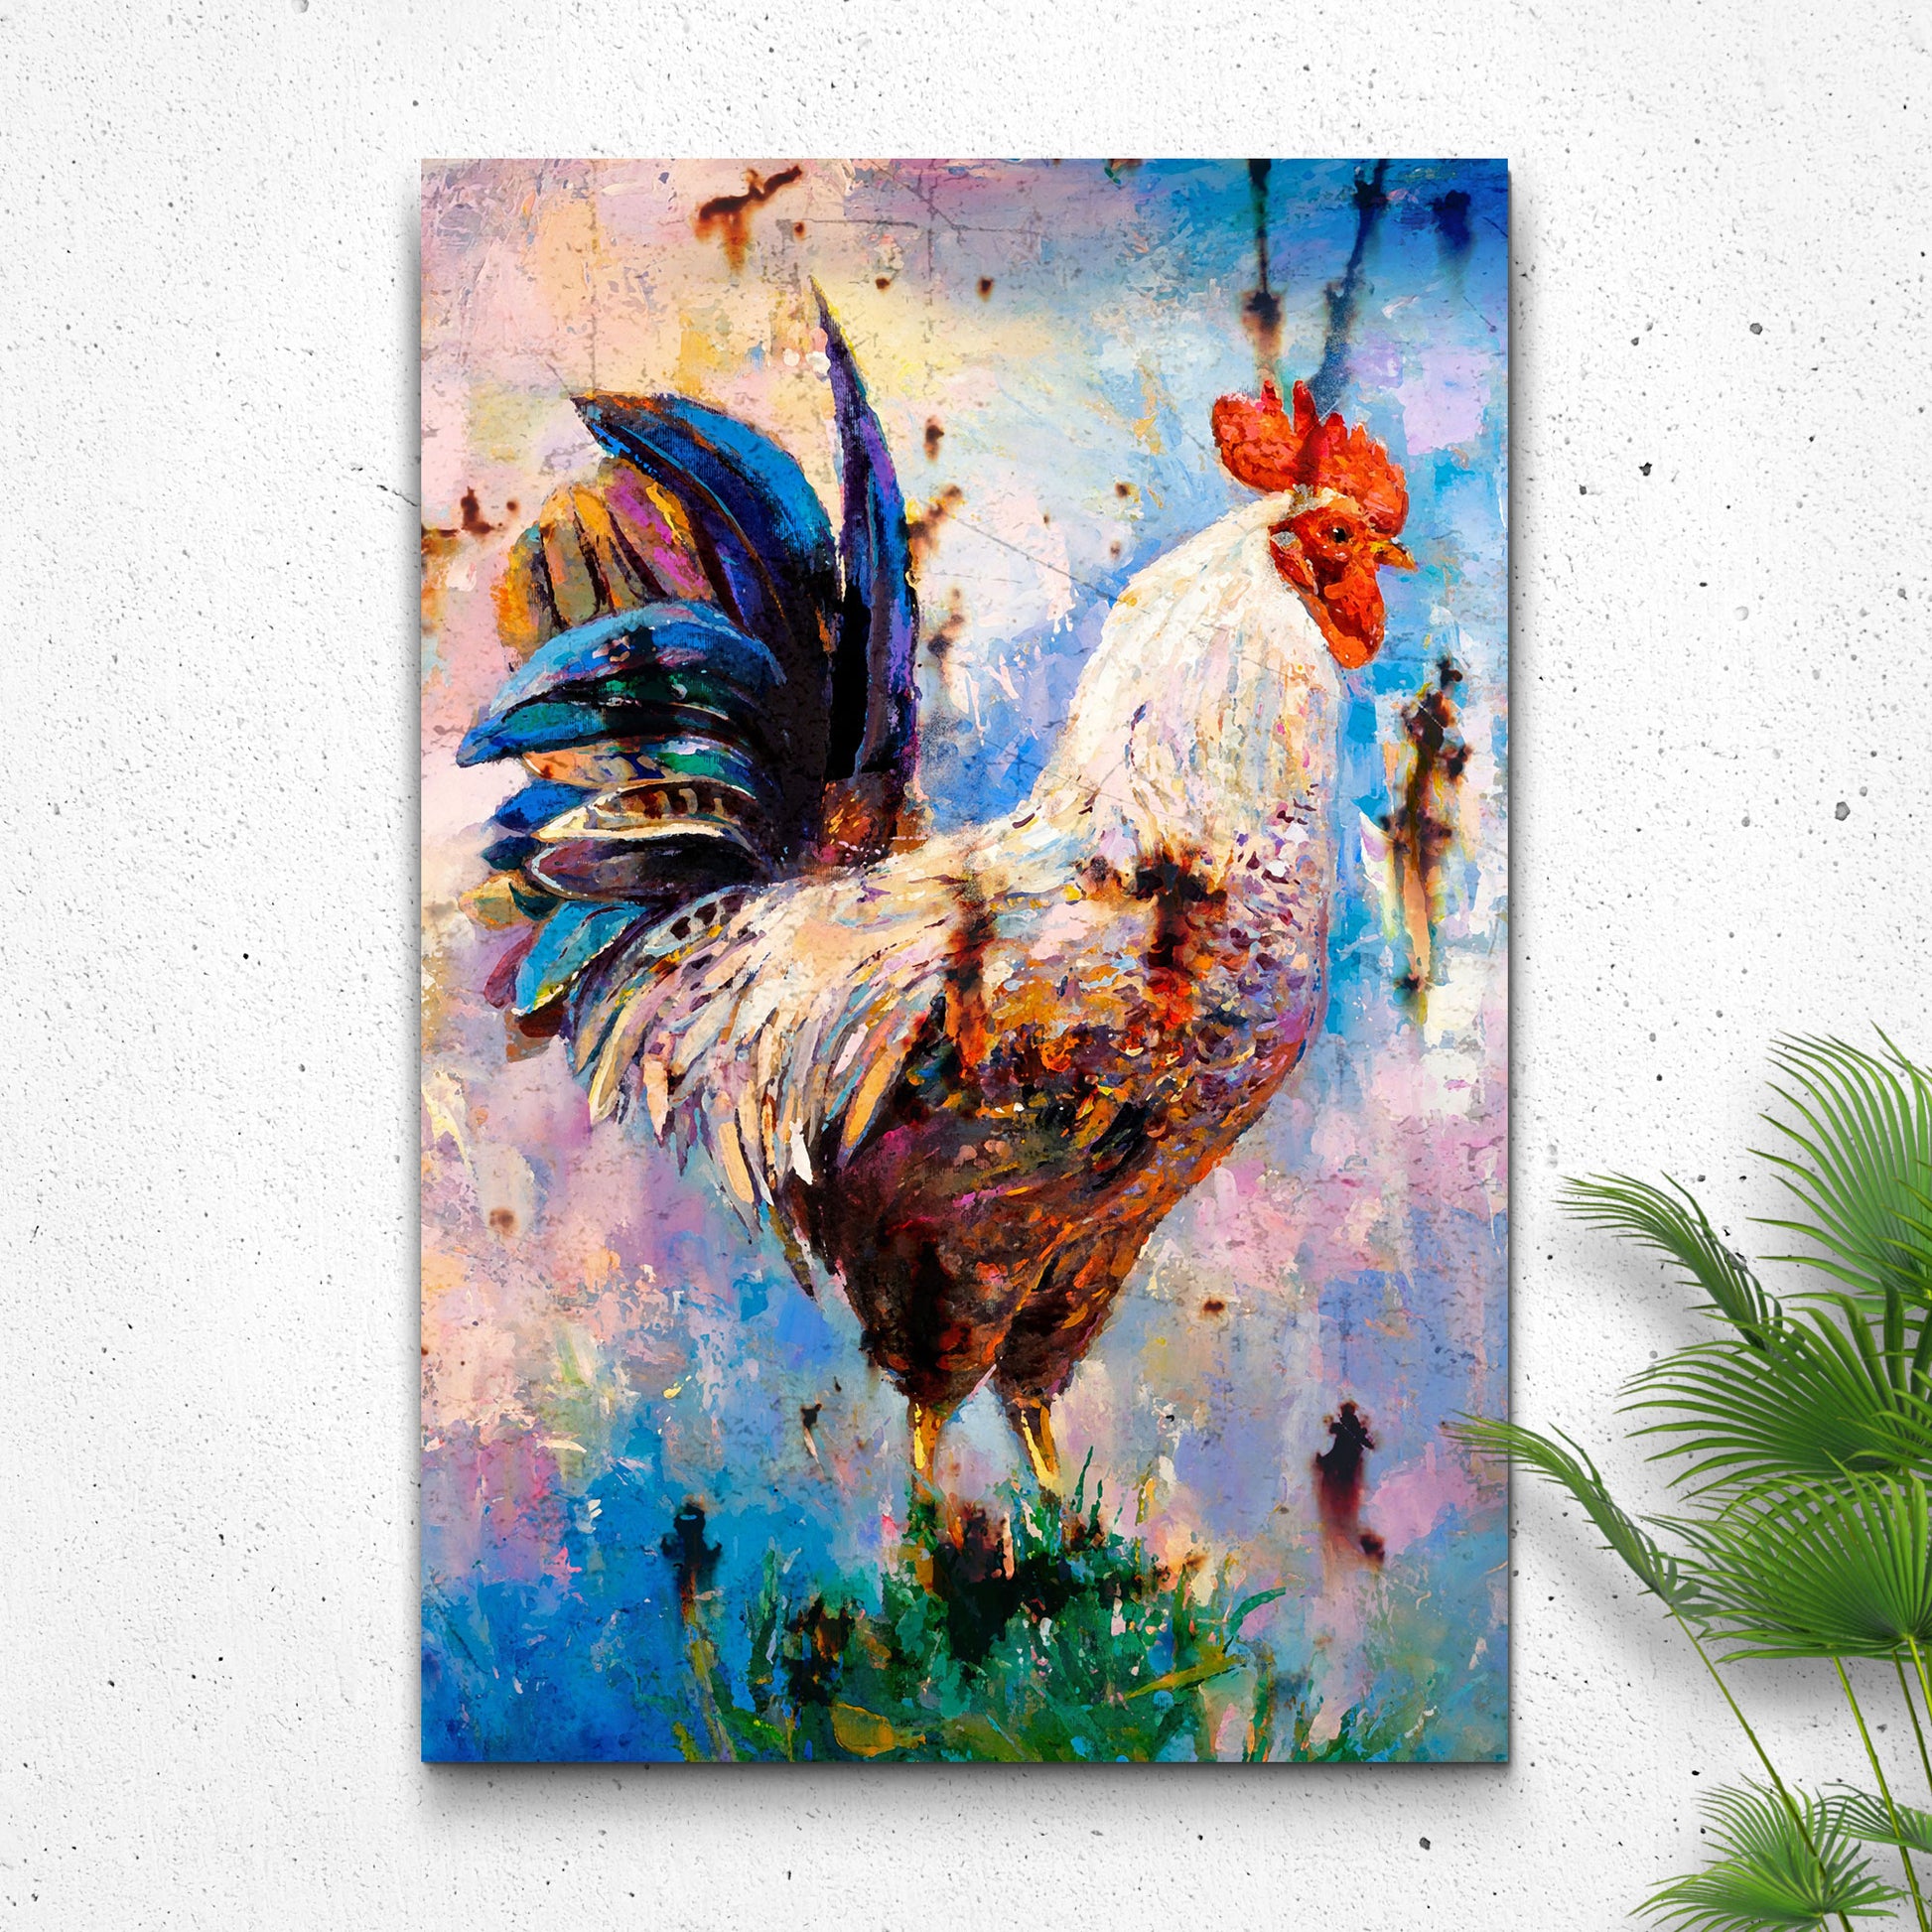 Rustic Country Chicken Canvas Wall Art - Image by Tailored Canvases